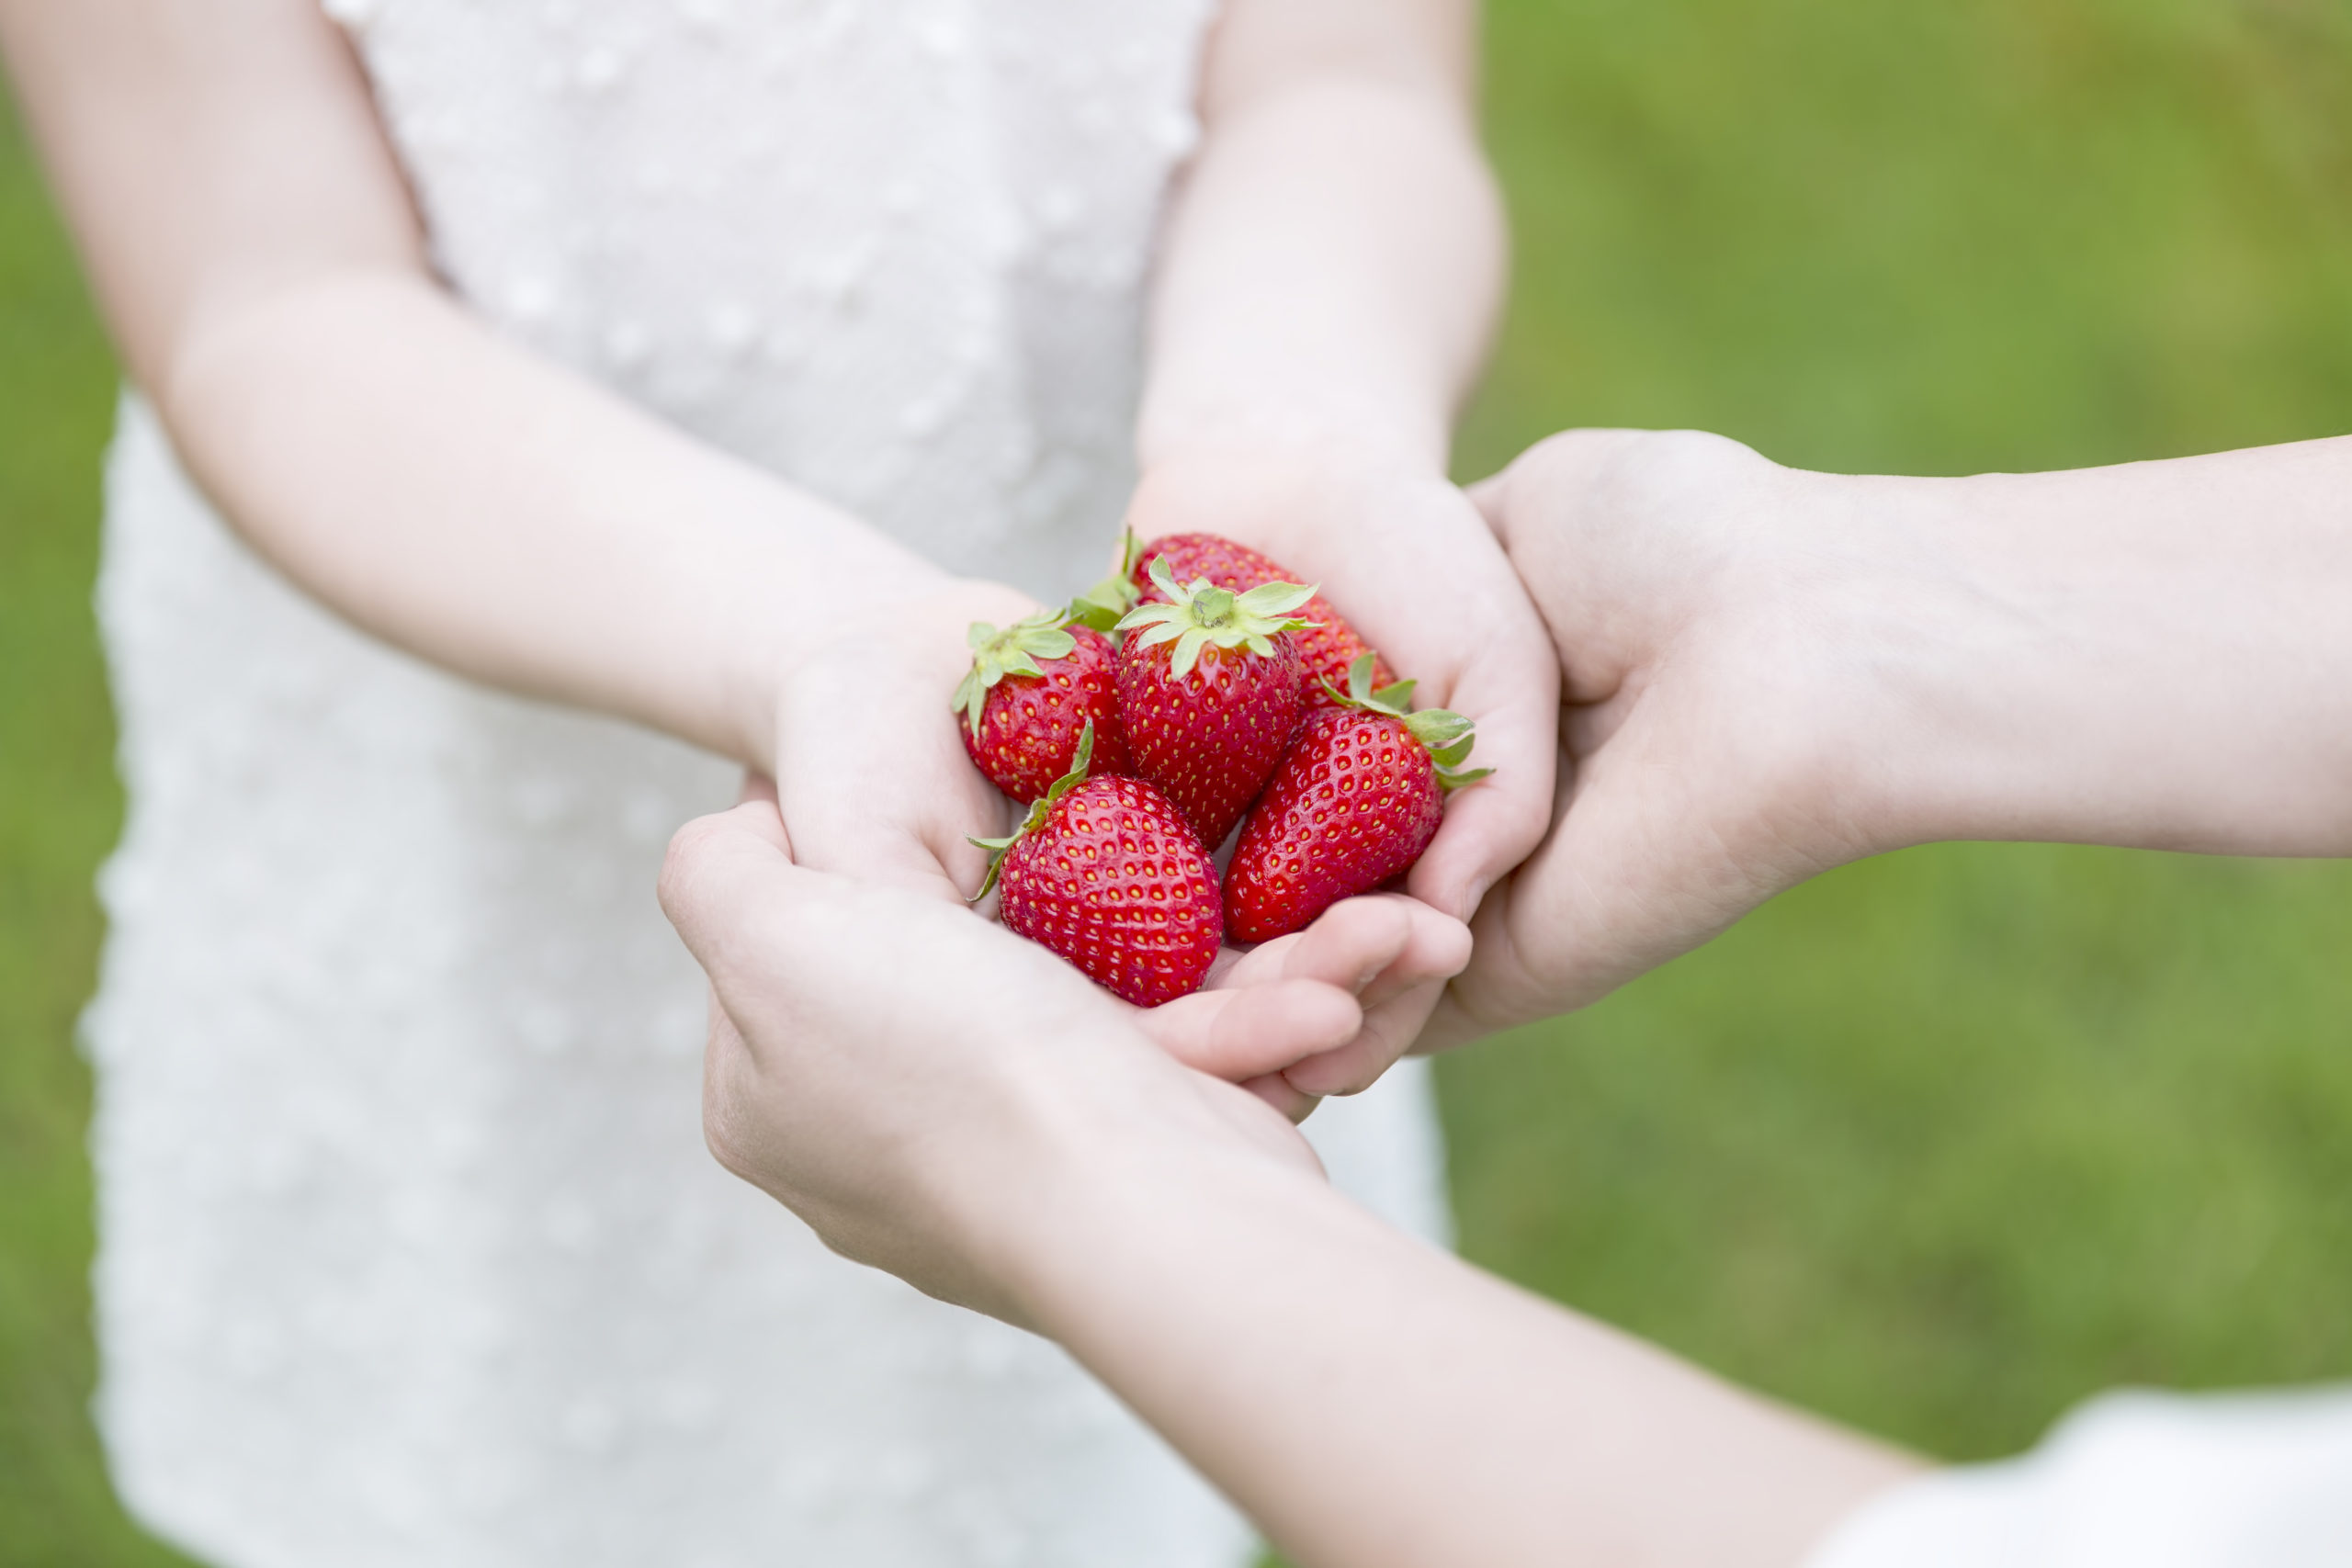 A 9-10 years old girl holding and showing some strawberries with her mother. Bothe of the characters are dressed with an elegant white dress. Without shoes. Both standing over grass garden with some white flowers blurred.
Only the strawberries and the hands are on focus.